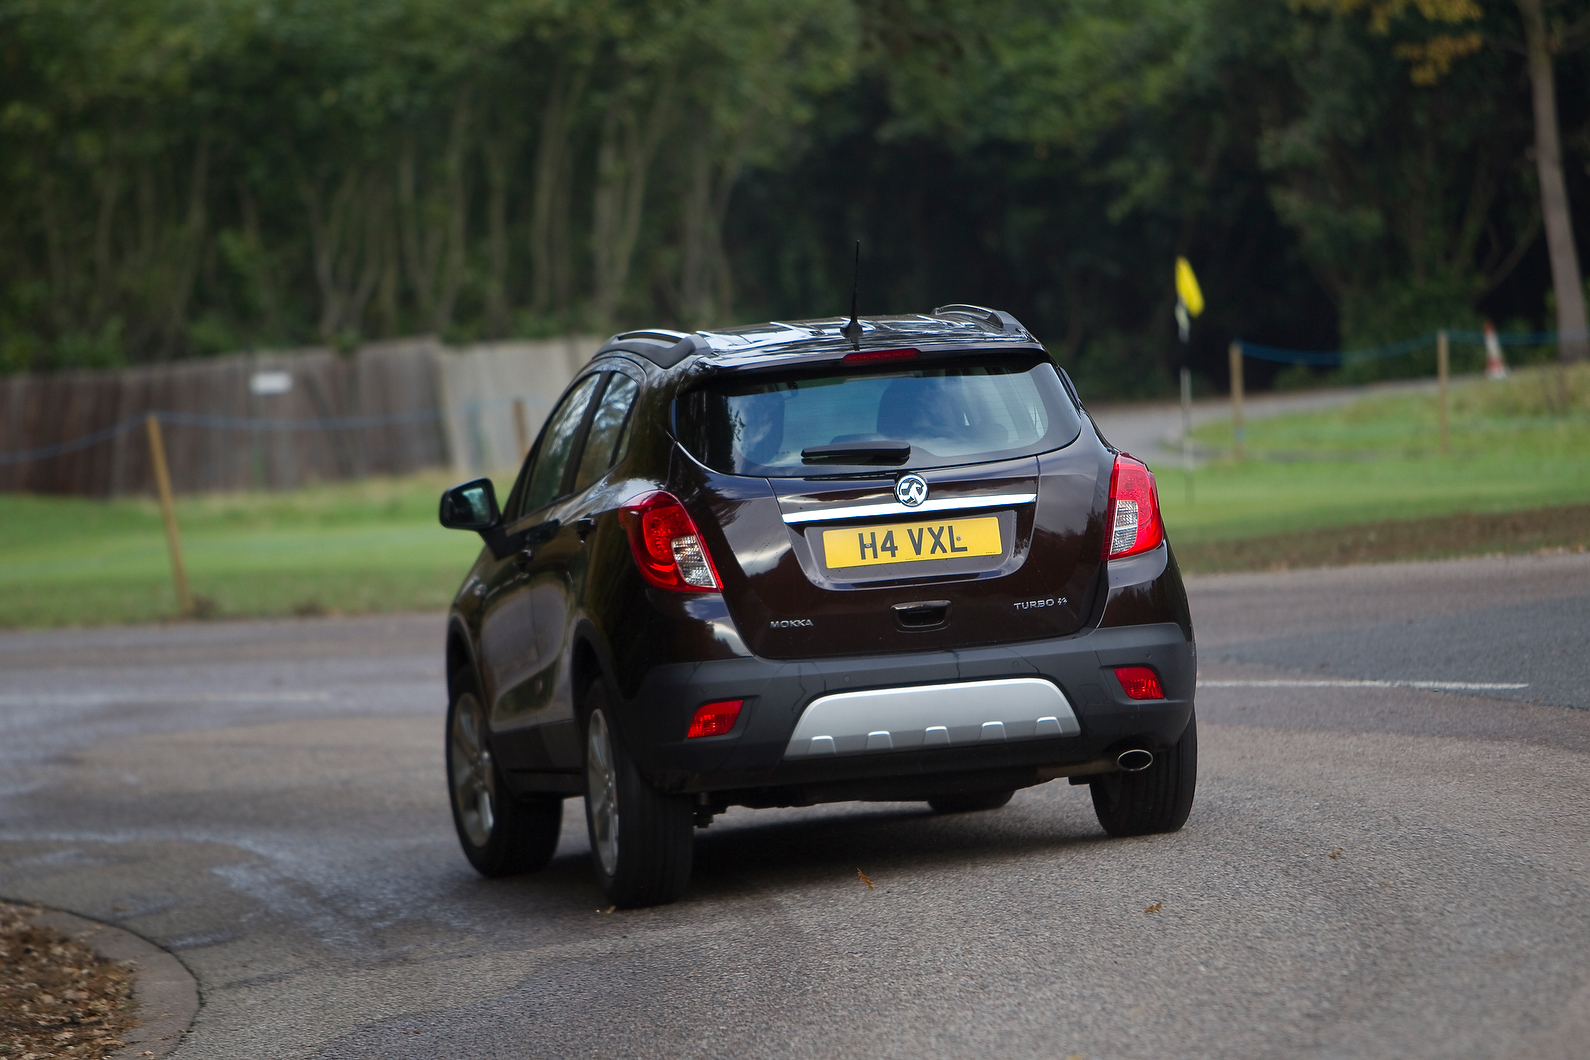 The Vauxhall Mokka has a keen steer and feels secure